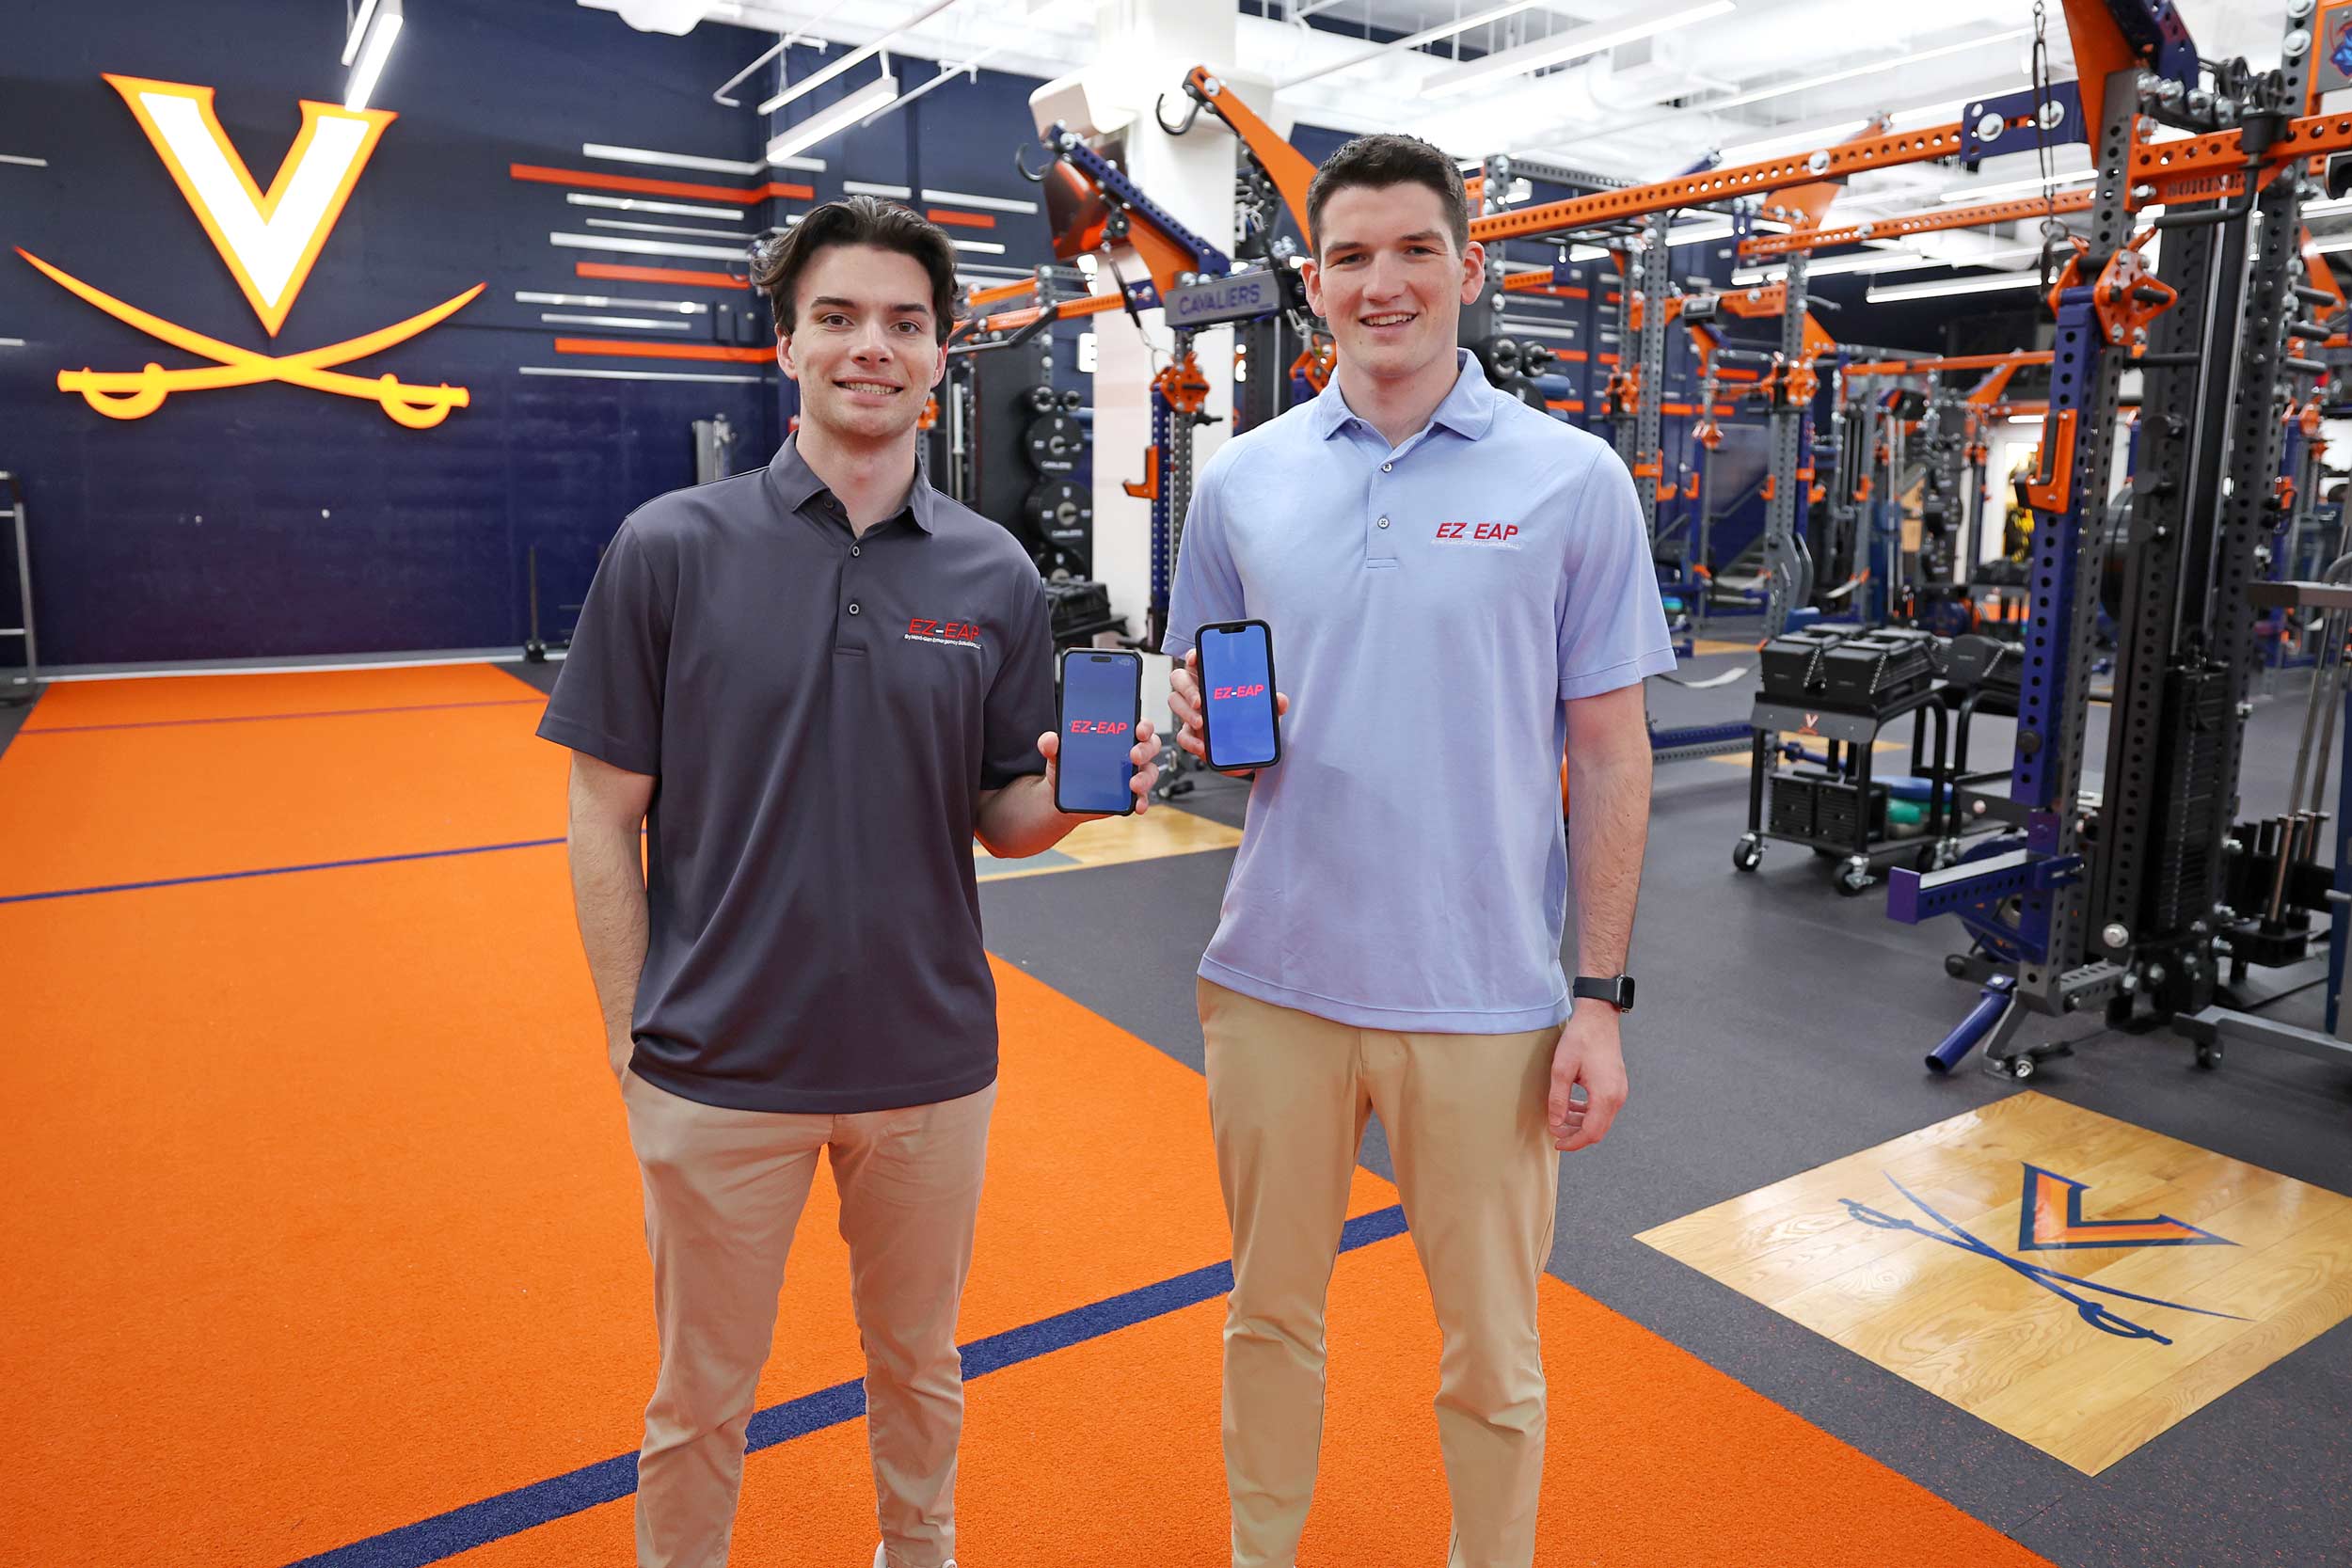 CNL student Jacob Swisher (right) and engineering graduate A.J. Peppers